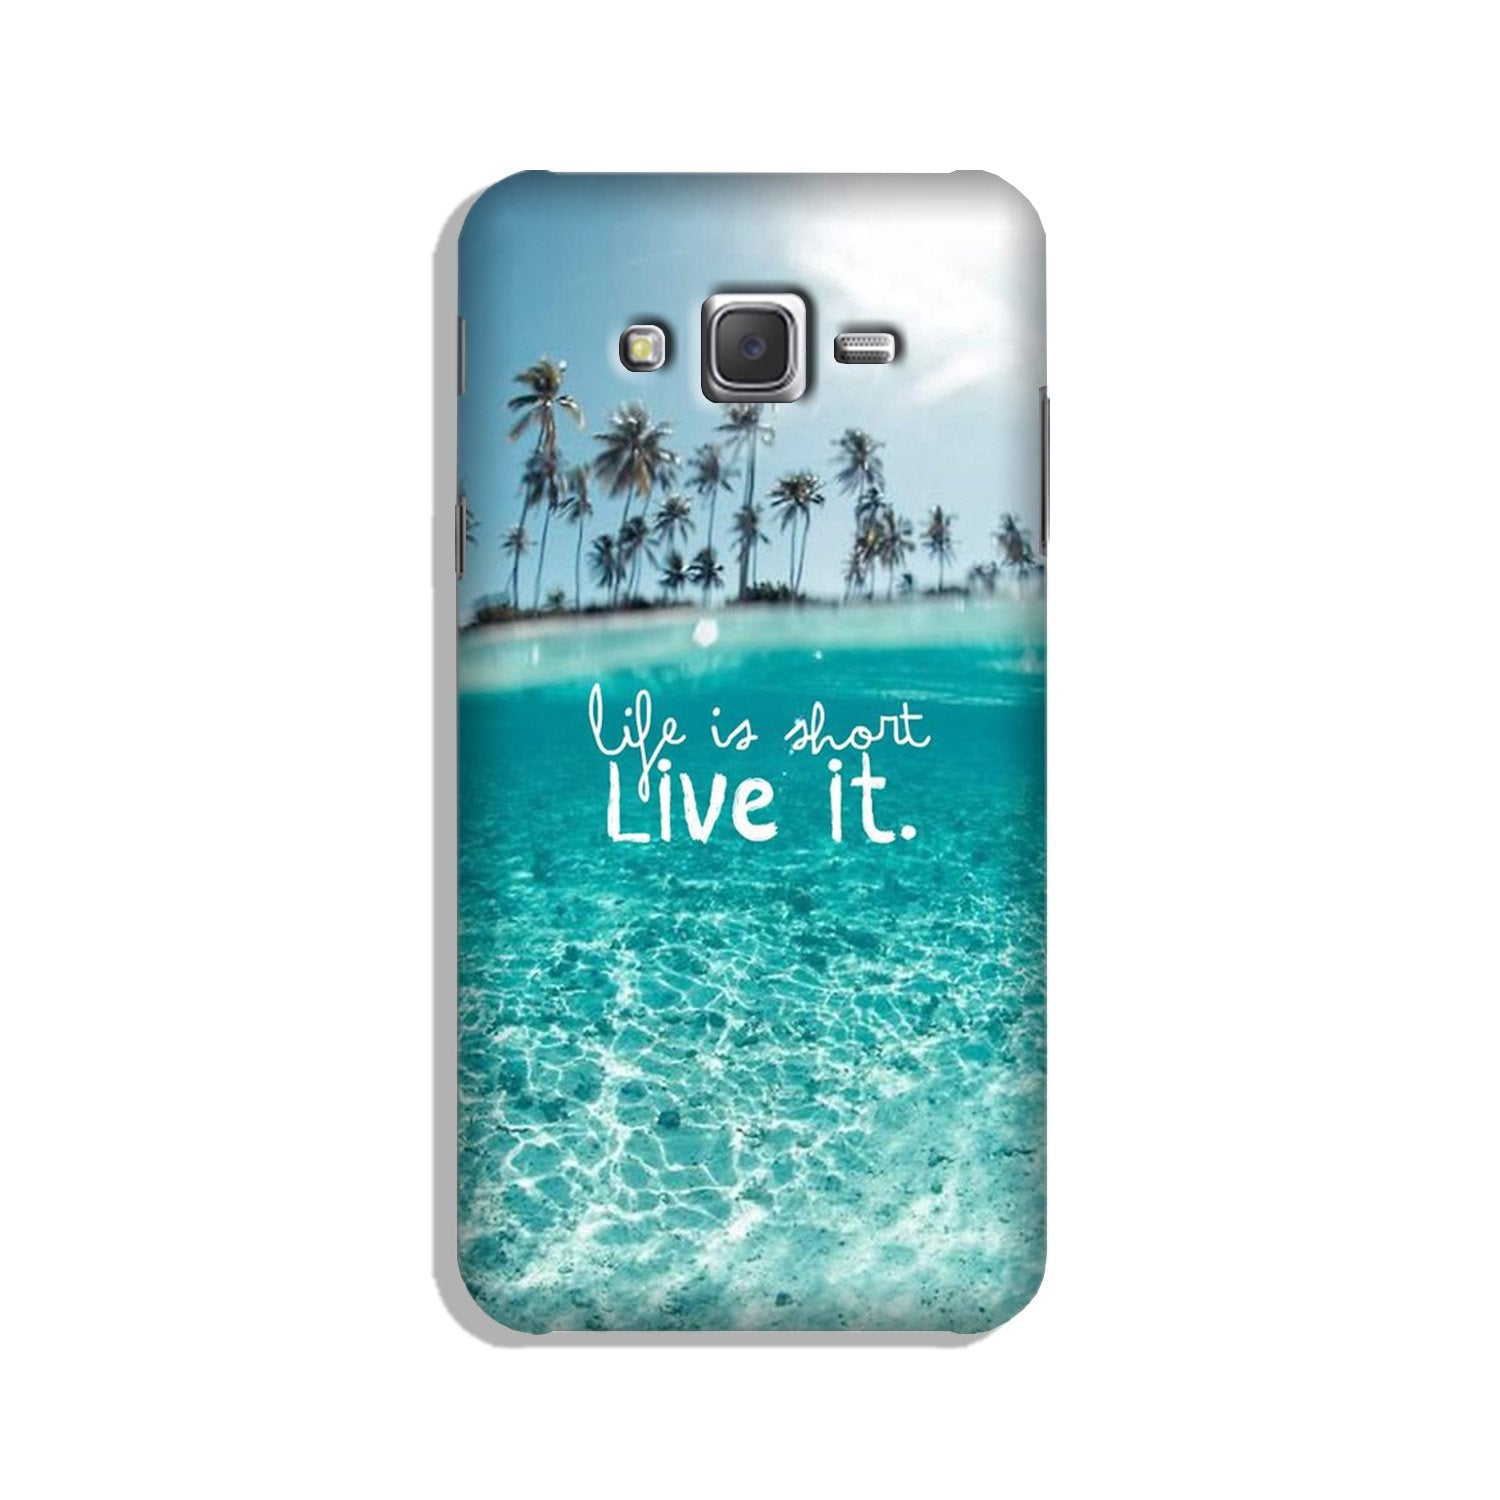 Life is short live it Case for Galaxy J3 (2015)